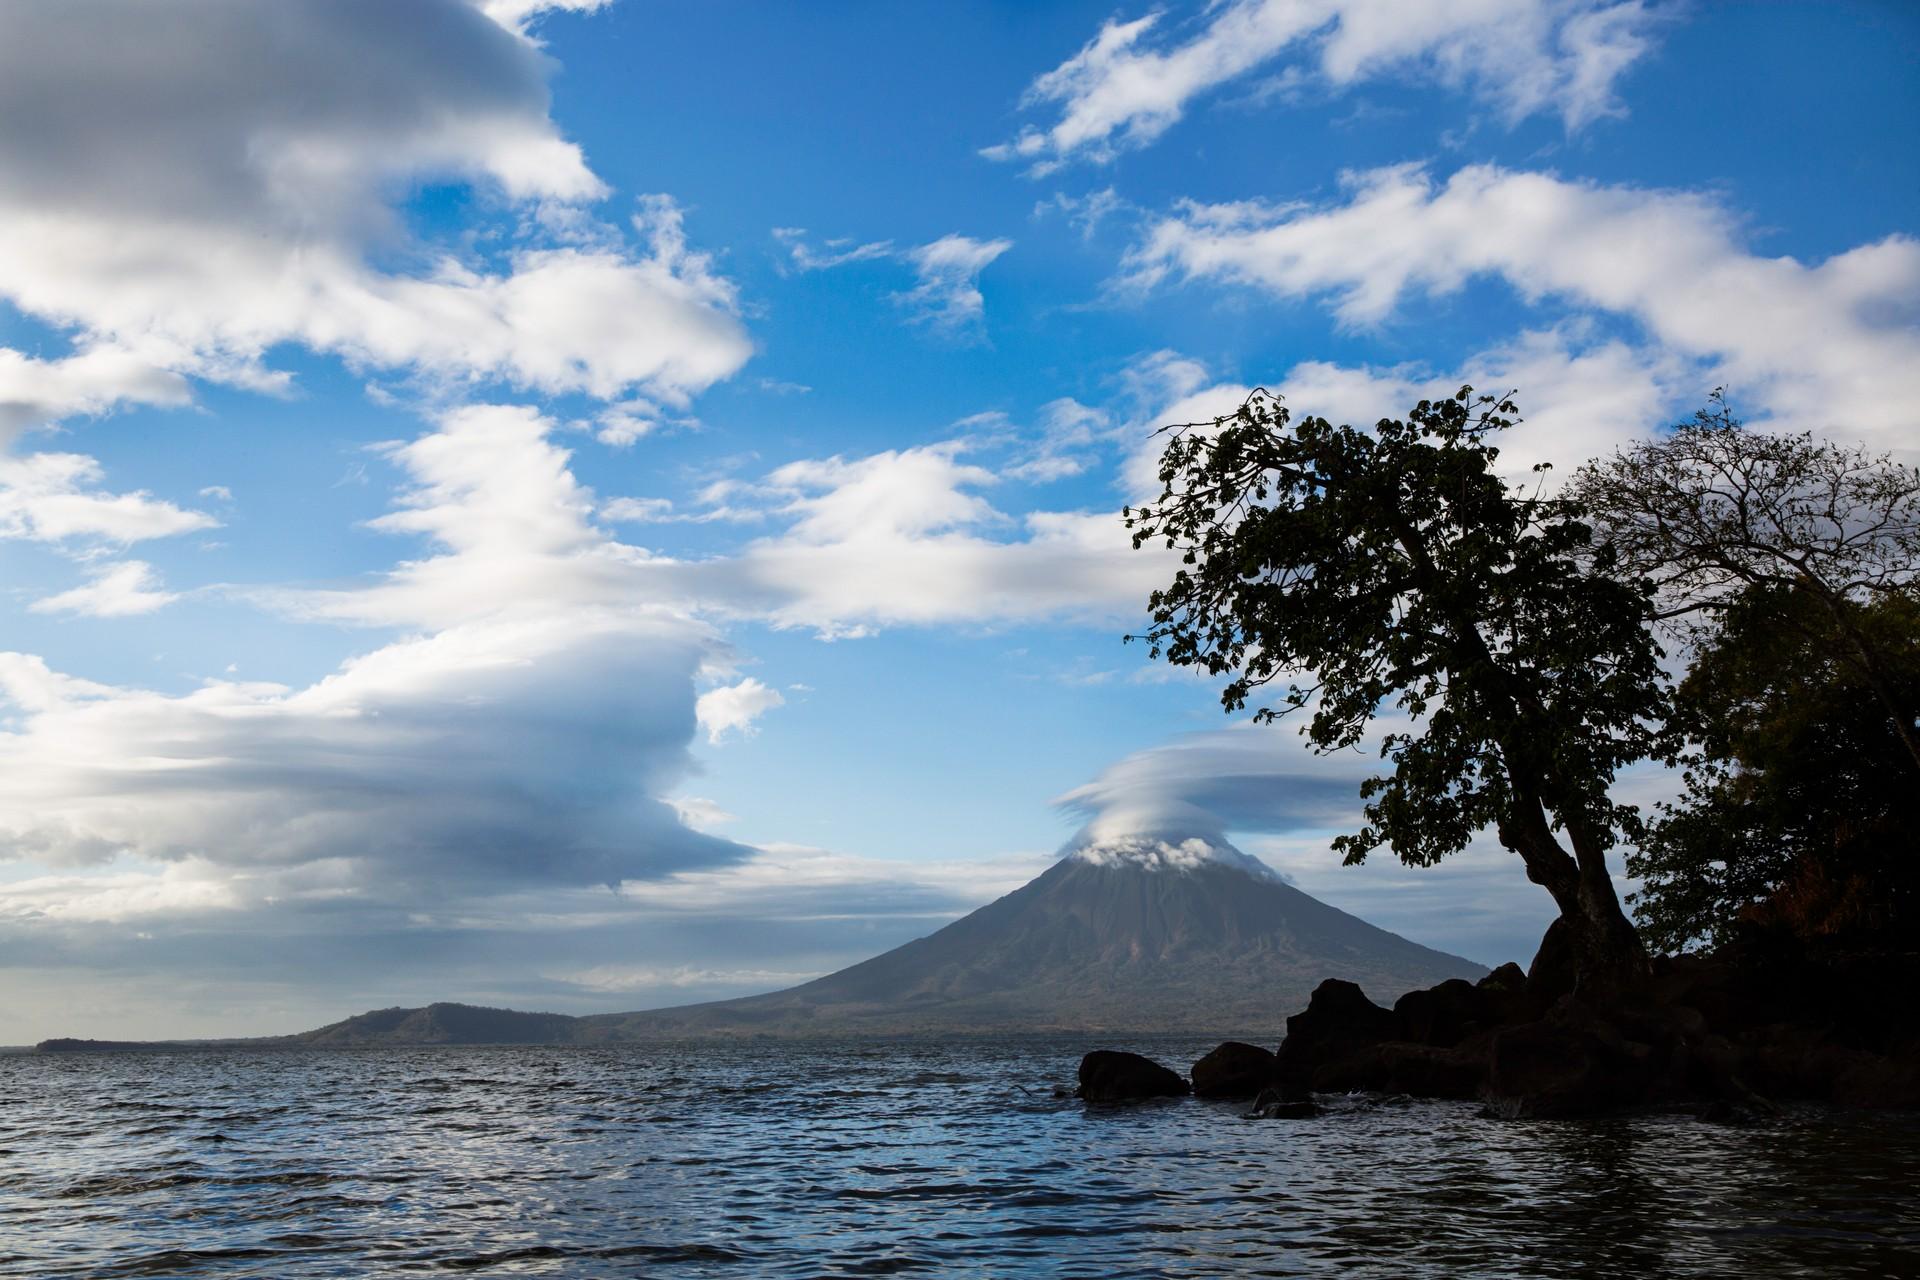 Beach and mountain range in Ometepe in sunny weather with few clouds